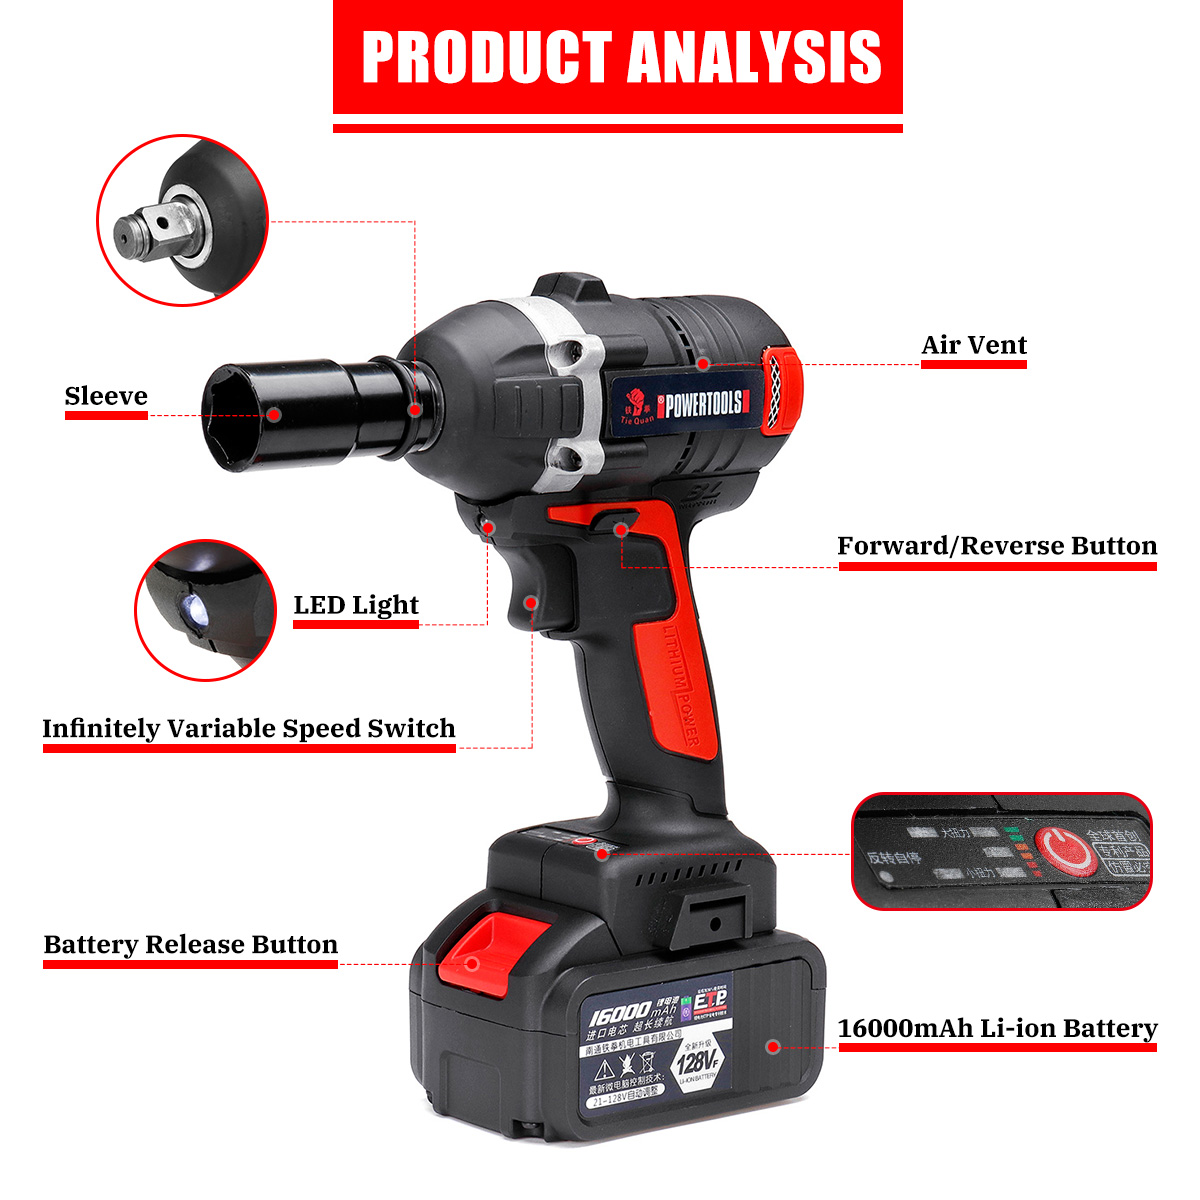 128VF-16000mah-Brushless-Electric-Wrench-Power-Wrench-Tool-330Nm-Cordless-Wrench-Kit-1437430-3